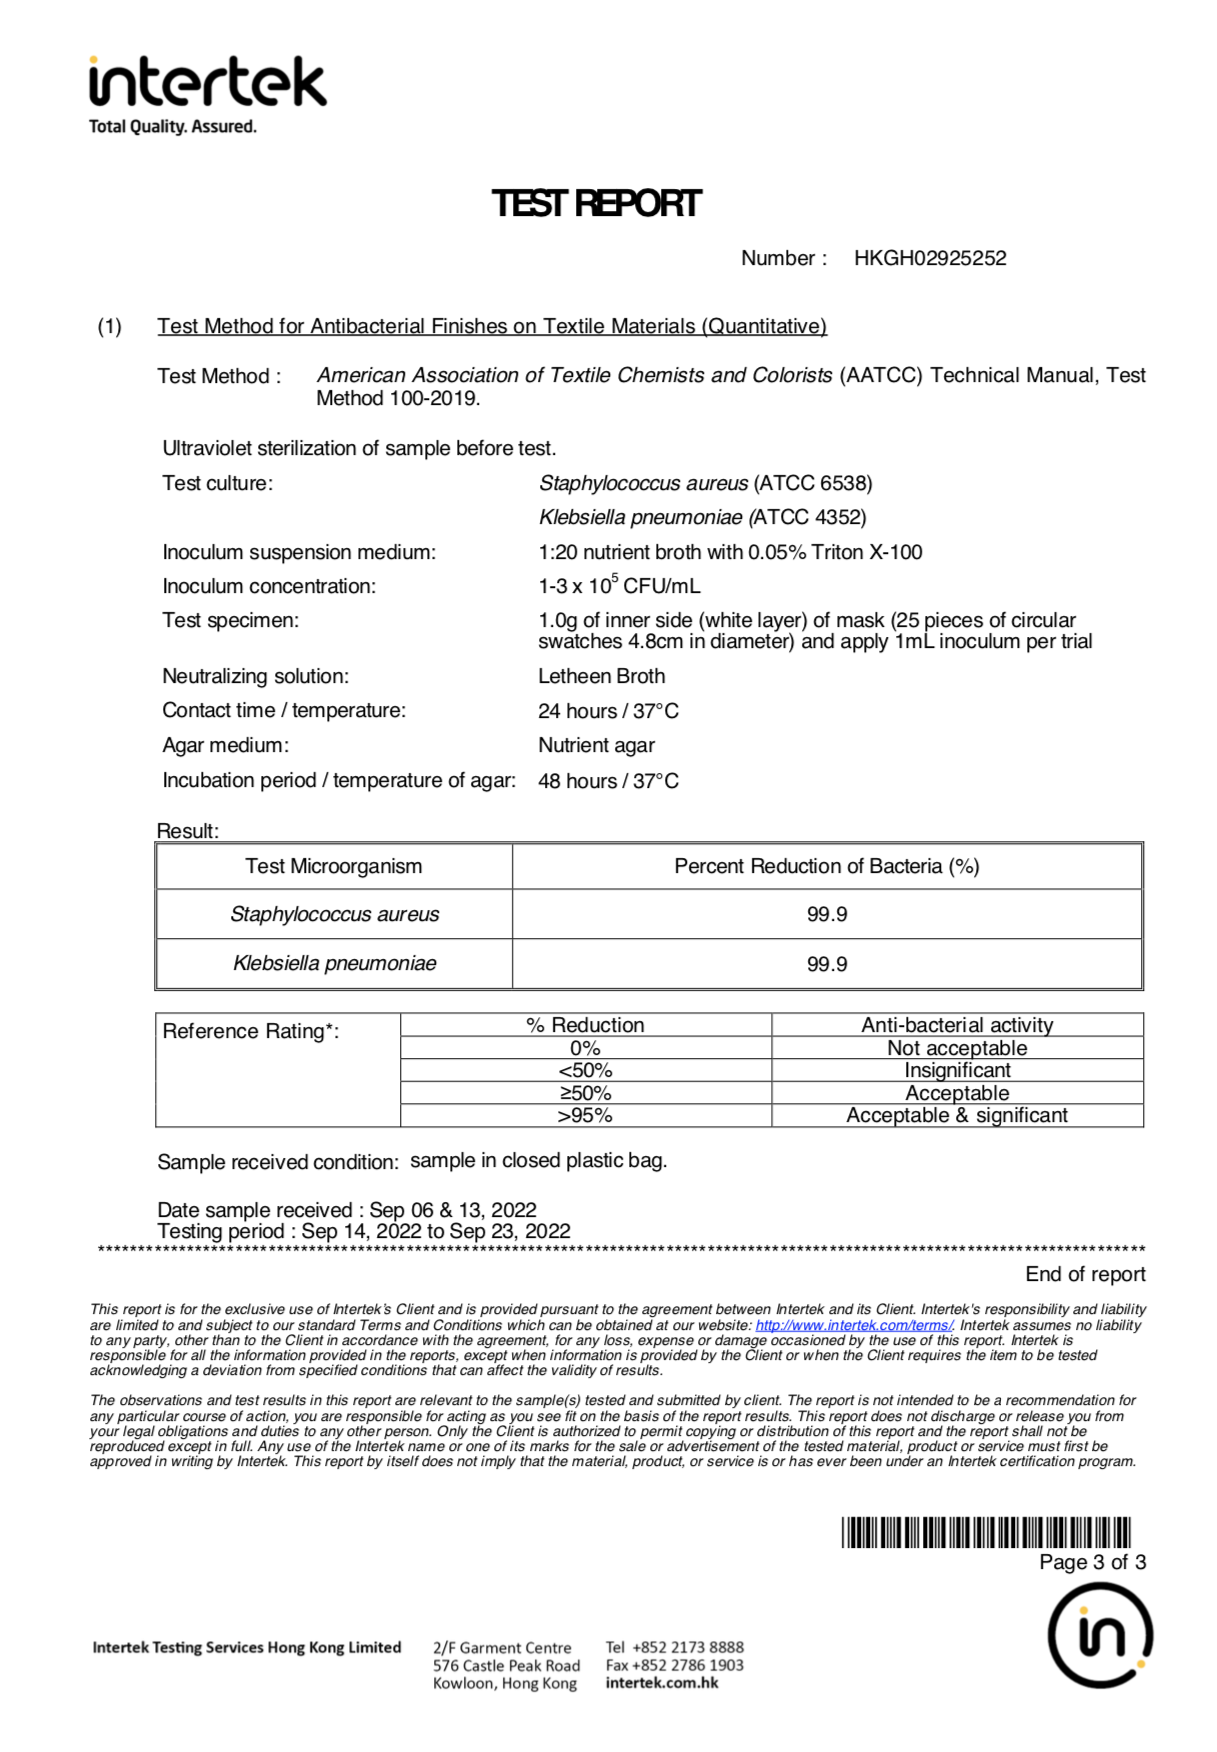 acc+ Taiwan French adult mask ASTM Level 3 Intertek report proves long-acting antibacterial